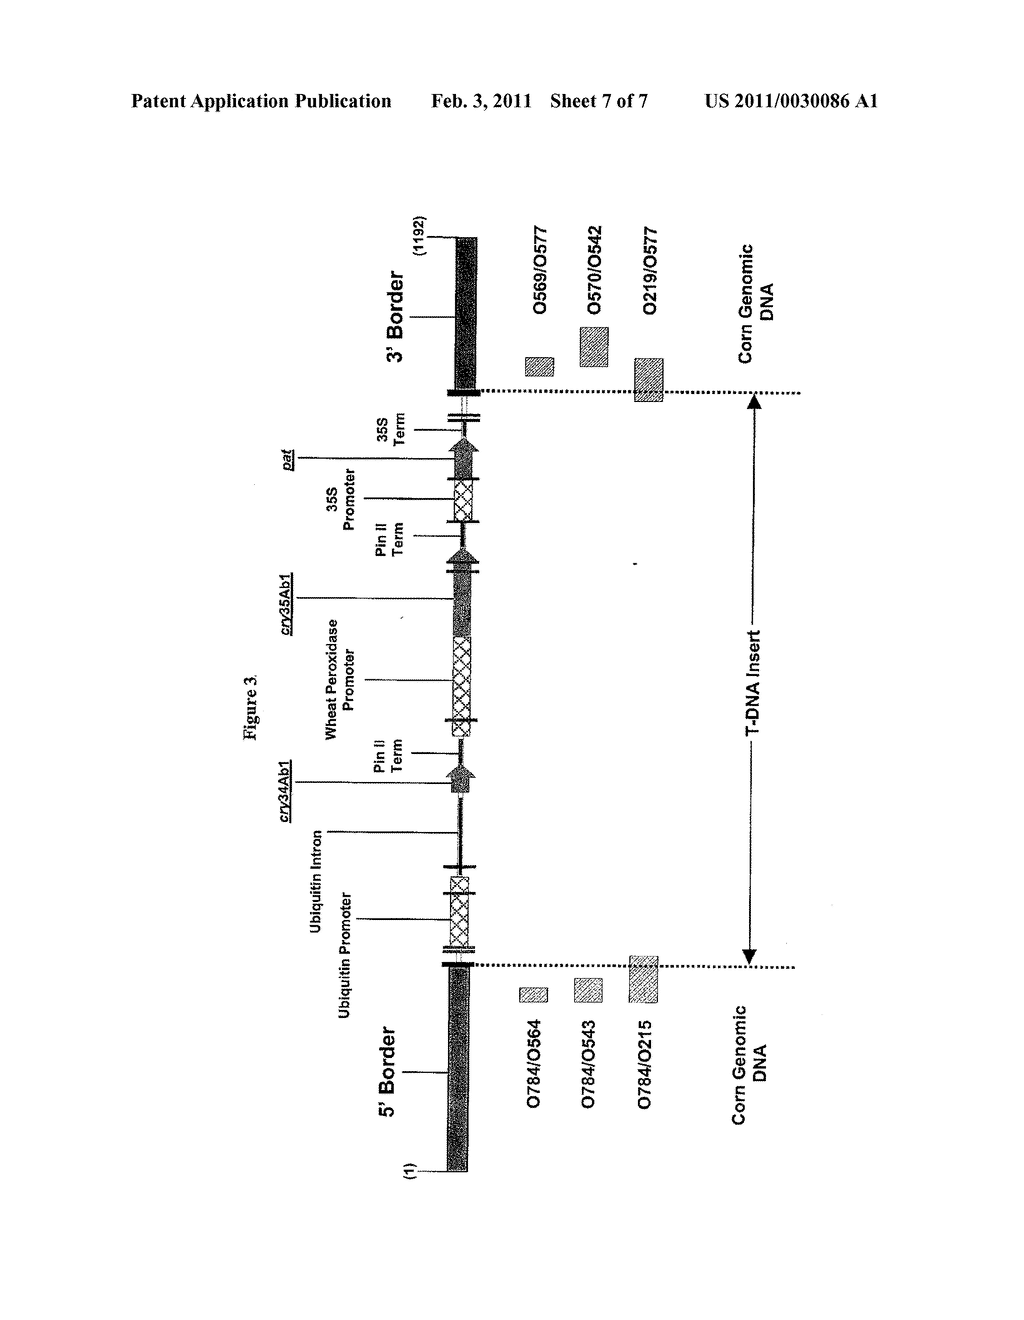 CORN EVENT DAS-59122-7 AND METHODS FOR DETECTION THEREOF - diagram, schematic, and image 08